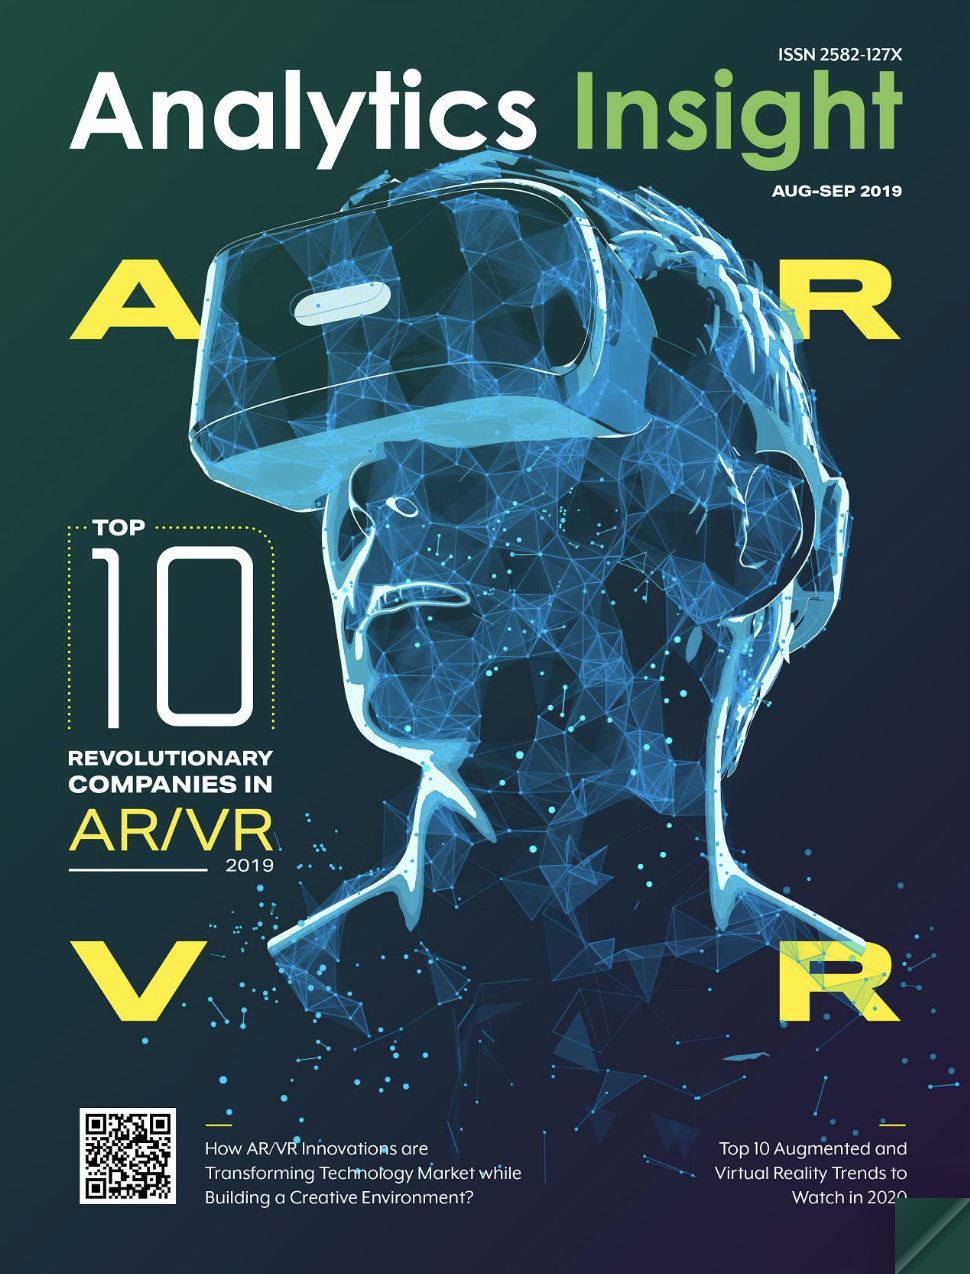 SketchAR is listed as one of the Top 10 Revolutionary Companies in AR/VR 2019 by Analytics Insight